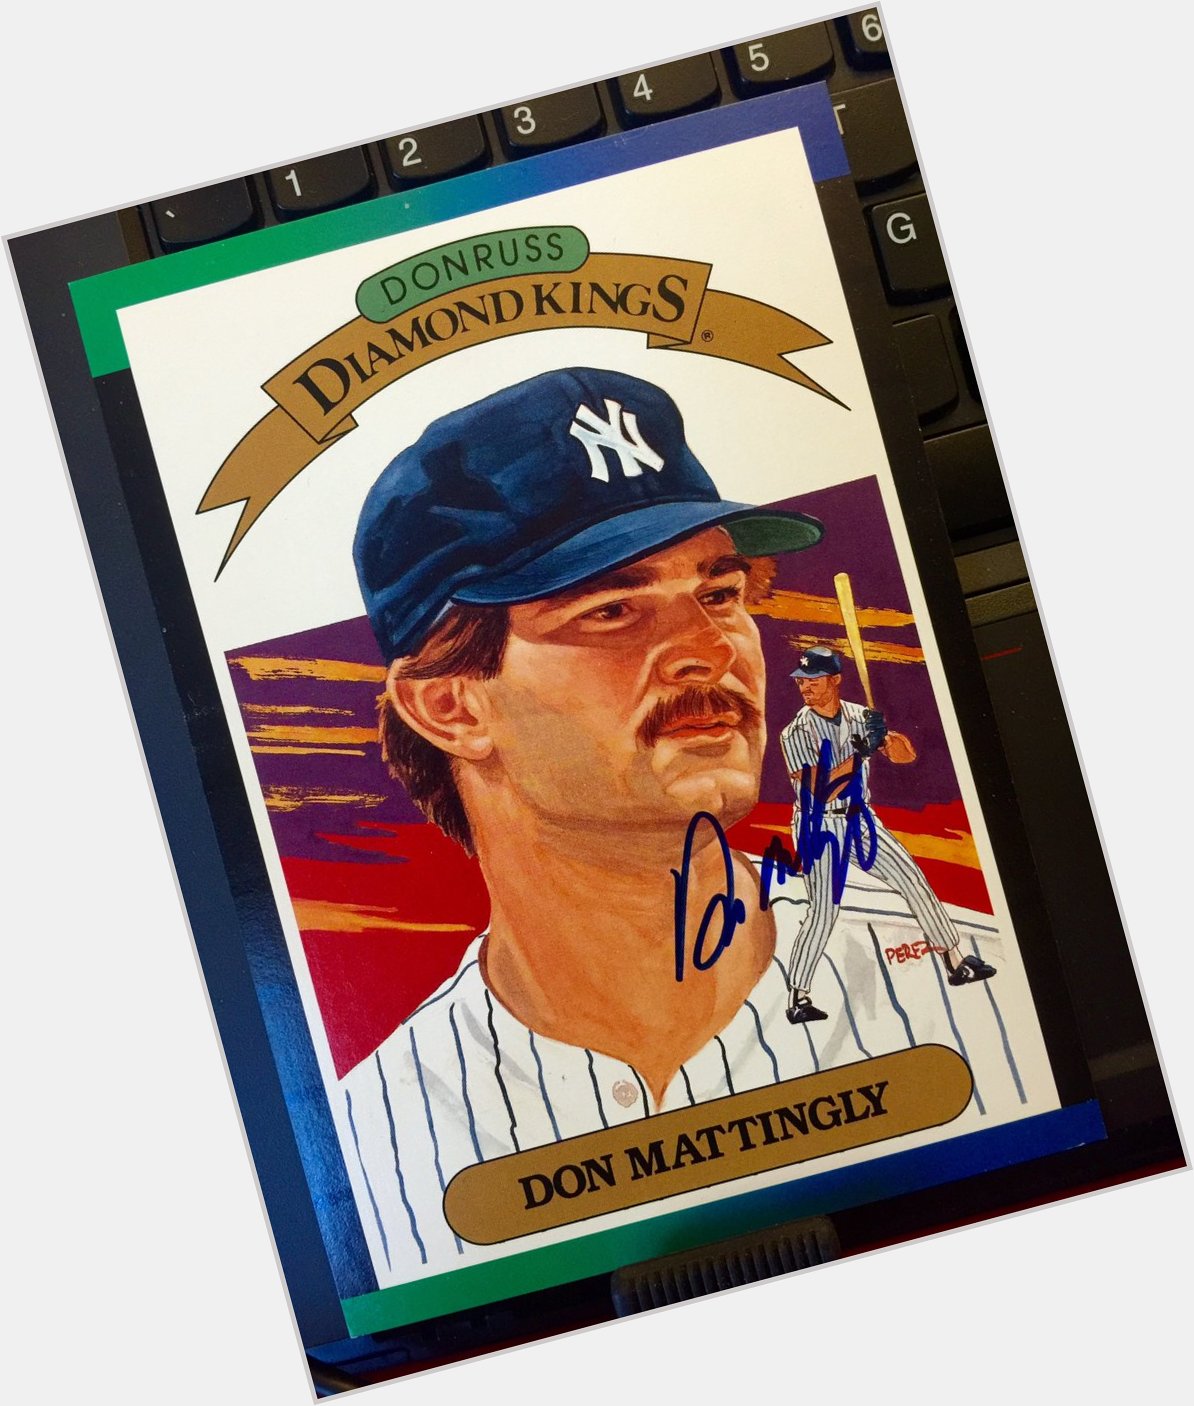 Happy Birthday to my all time favorite Yankee Don Mattingly  